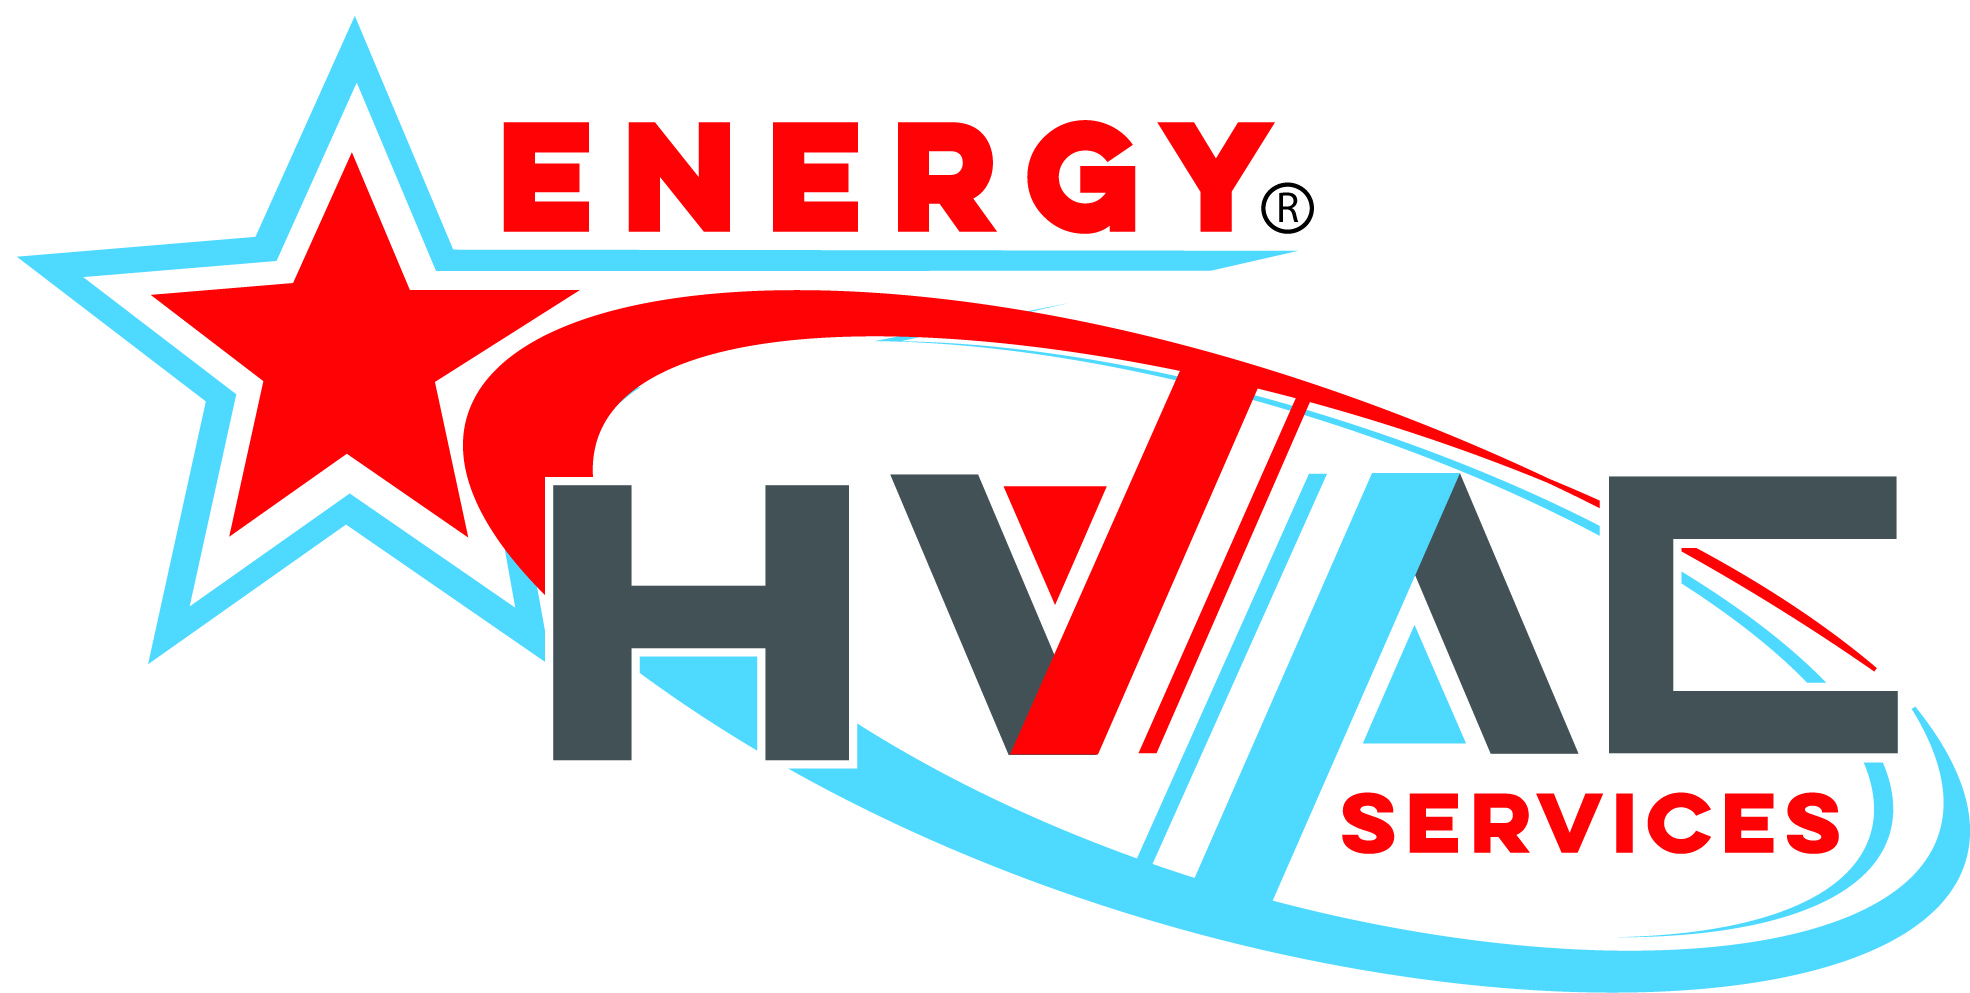 Energy HVAC Services Highlights What Makes It the Best Heating and Cooling Company in Tarzana 